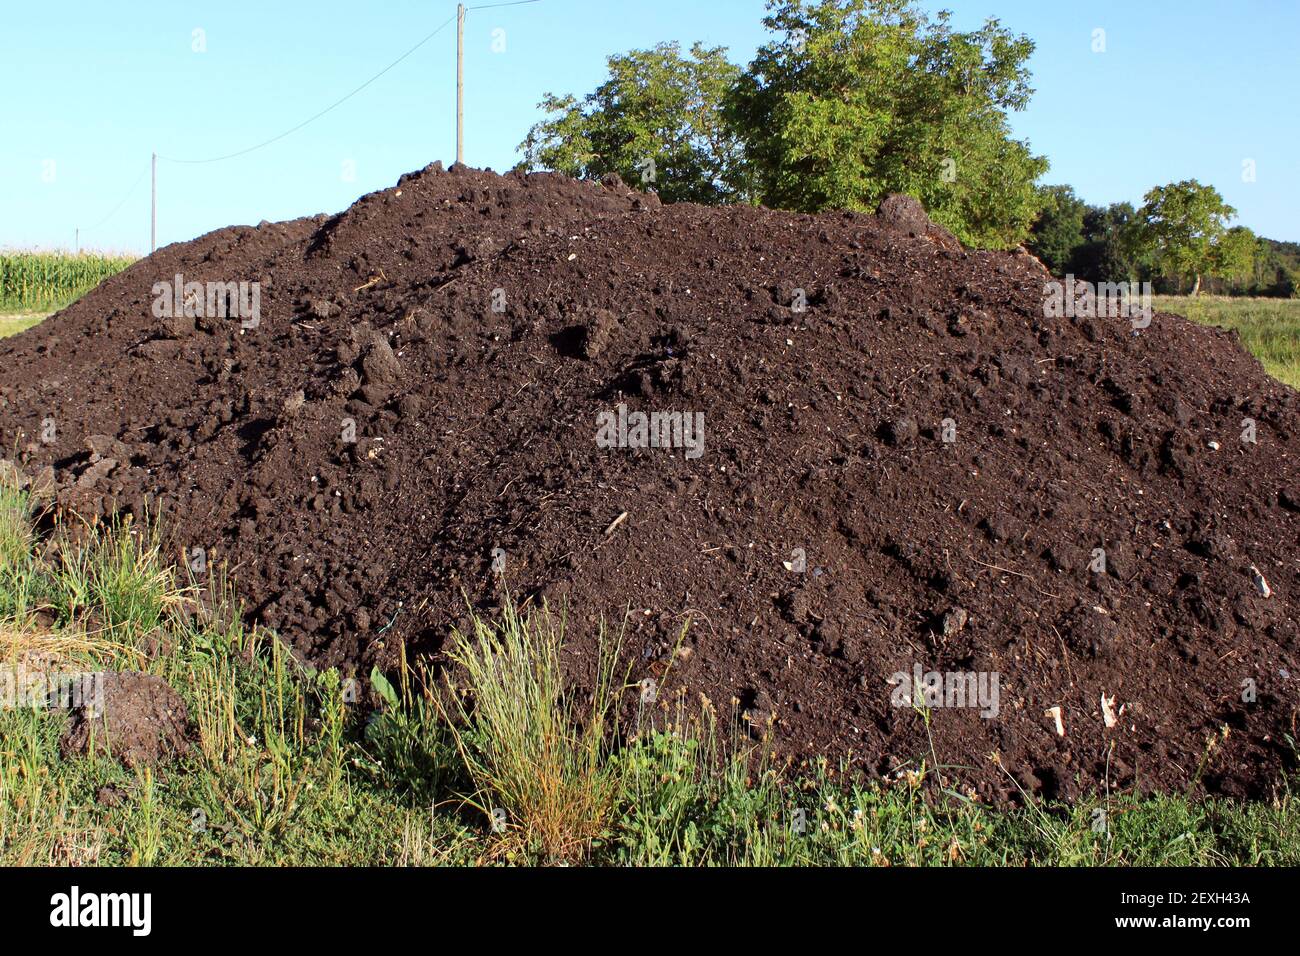 Horticultural compost Stock Photo